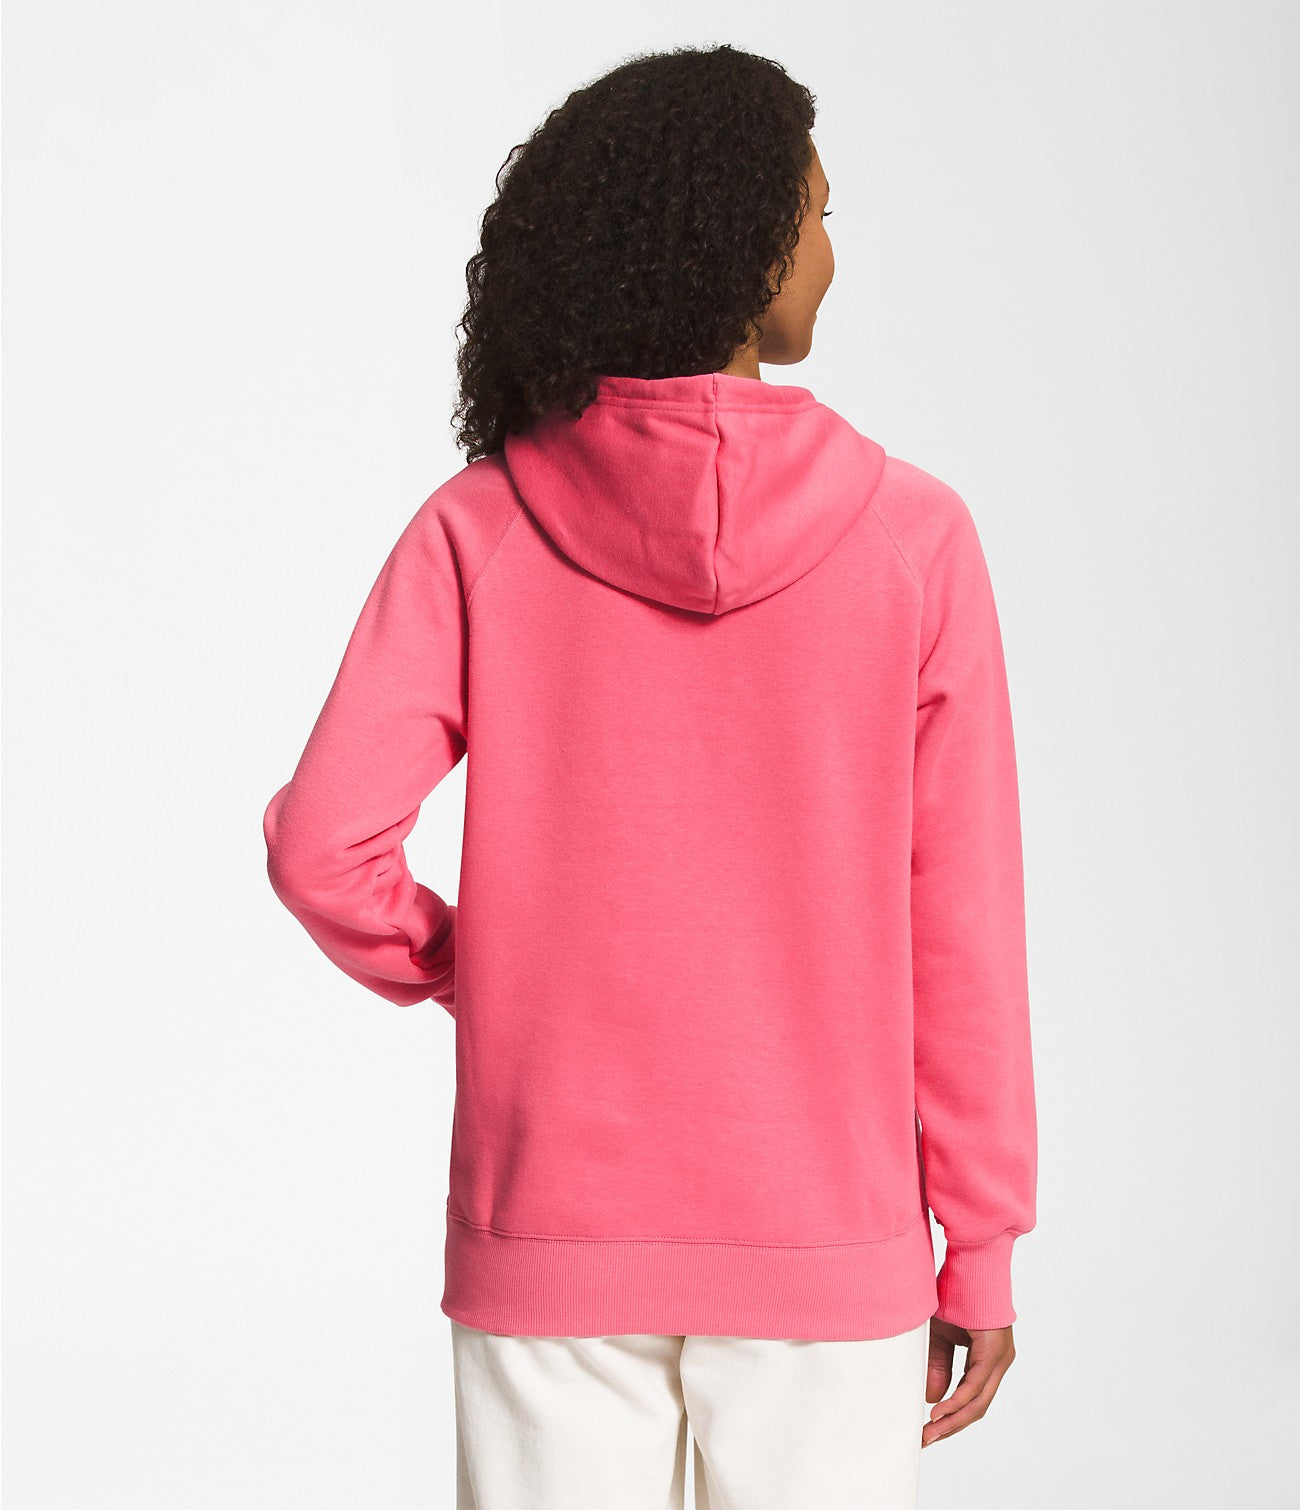 CHANDAIL À CAPUCHON THE NORTH FACE FEMME, HALF DOME COSMO PINK